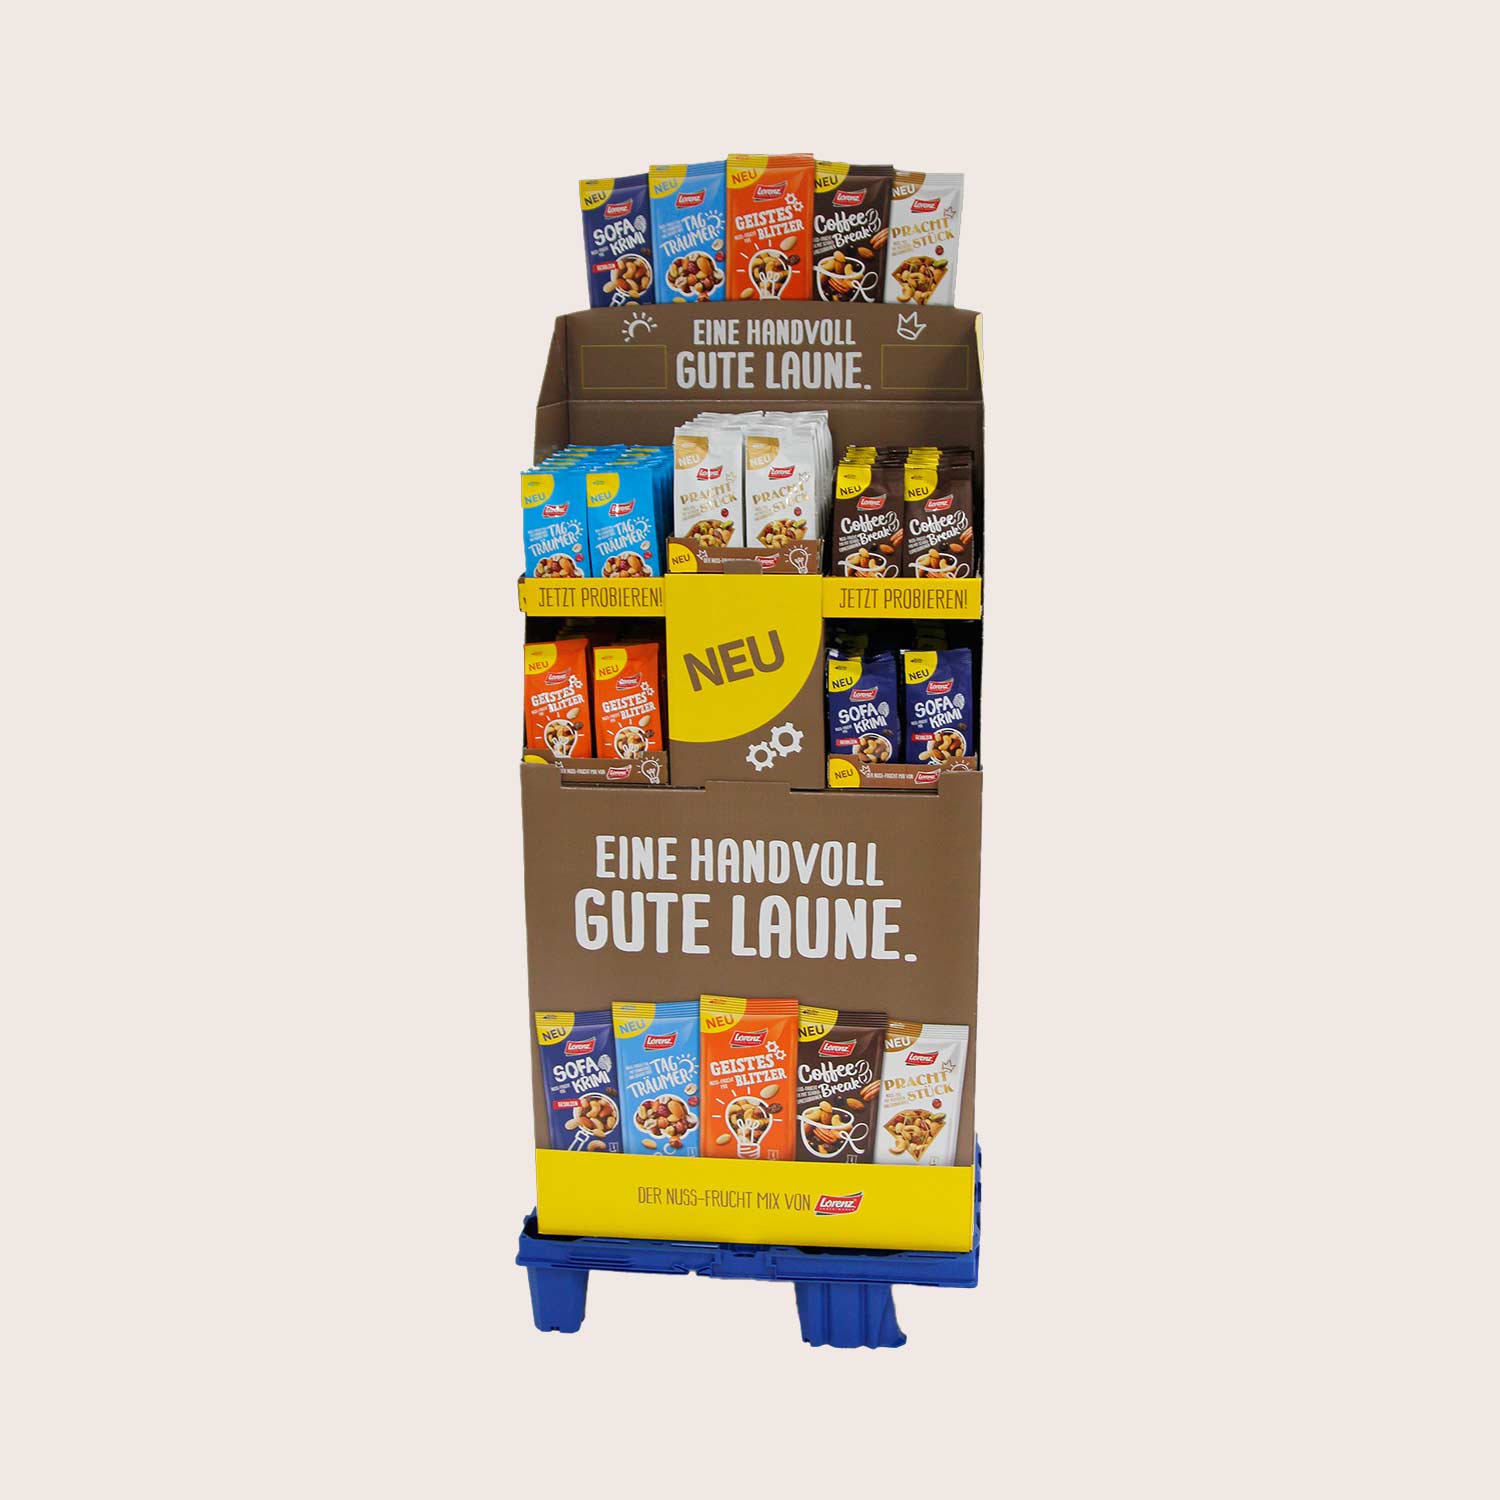 Promotional displays for snacks